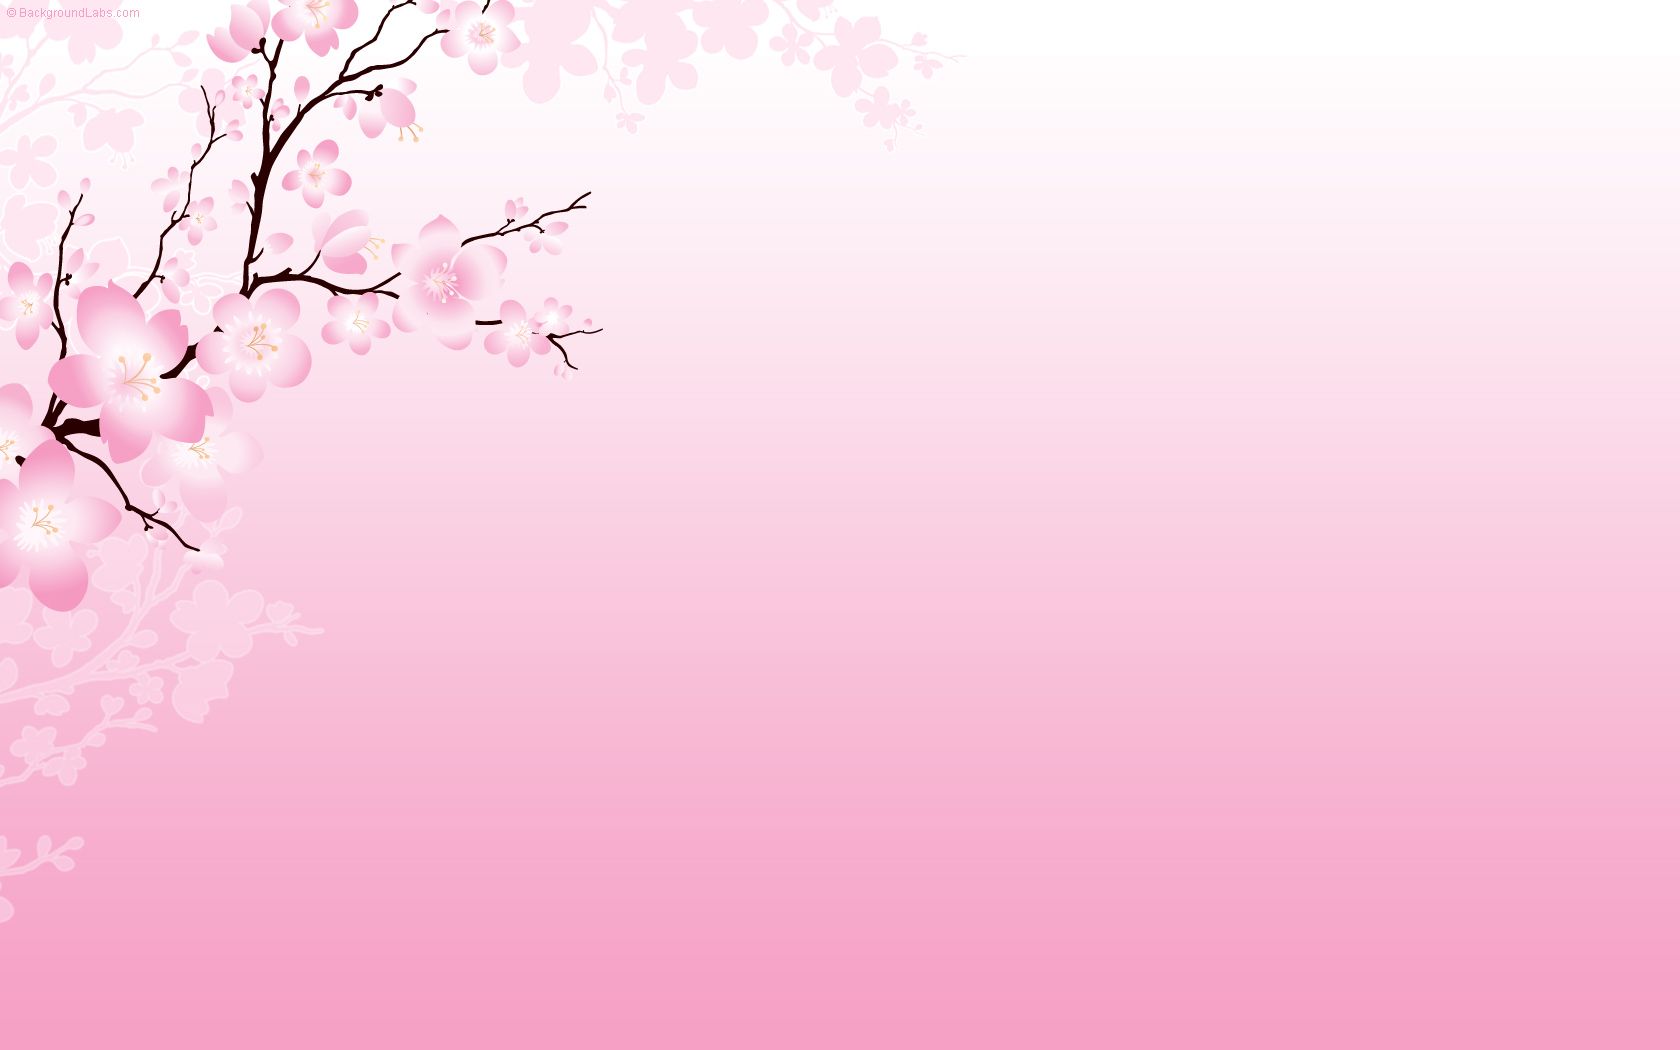 If you want to. Background clipart cherry blossom